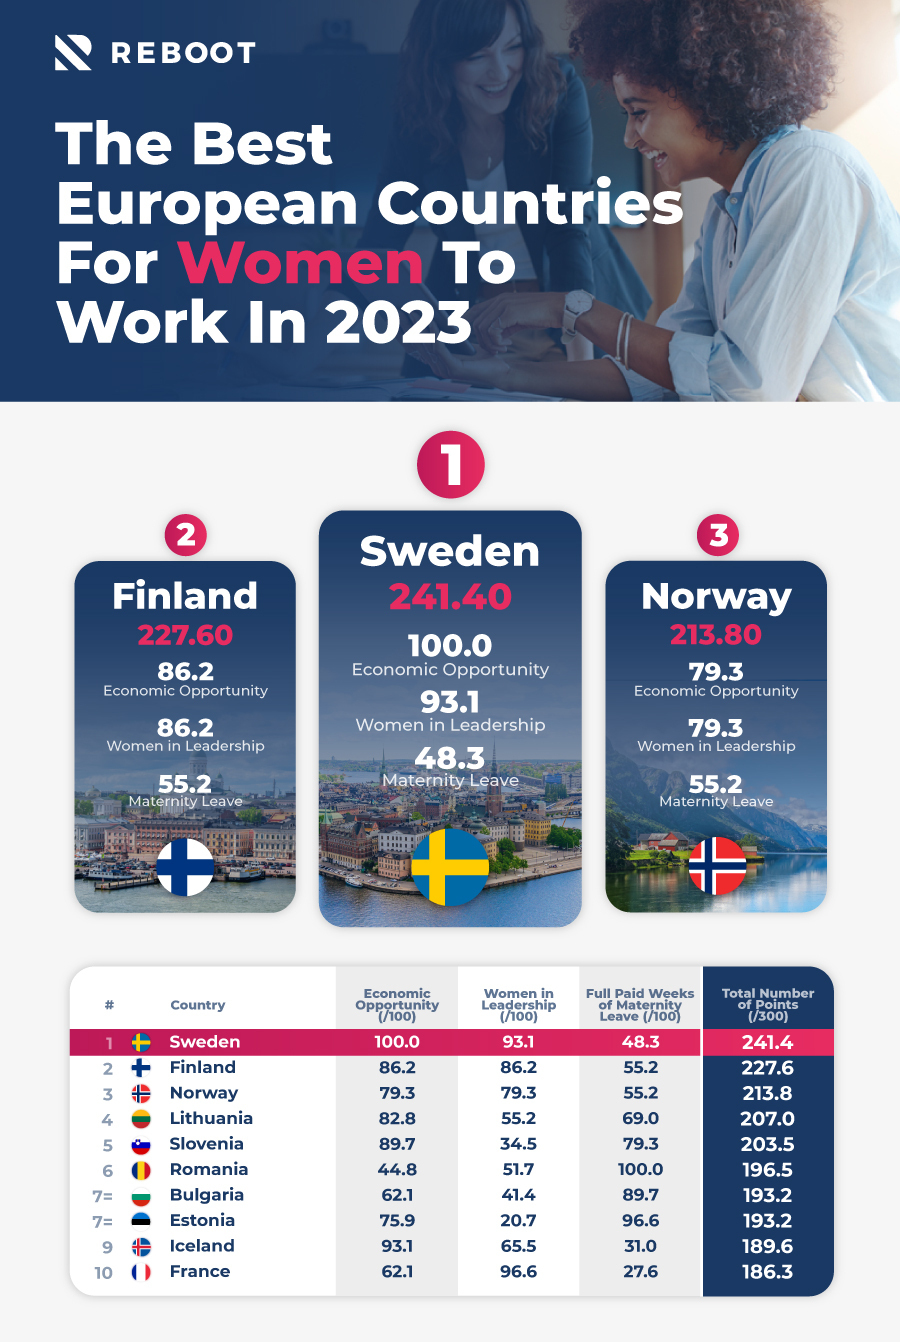 A graphic showing the top 10 European countries for women to work